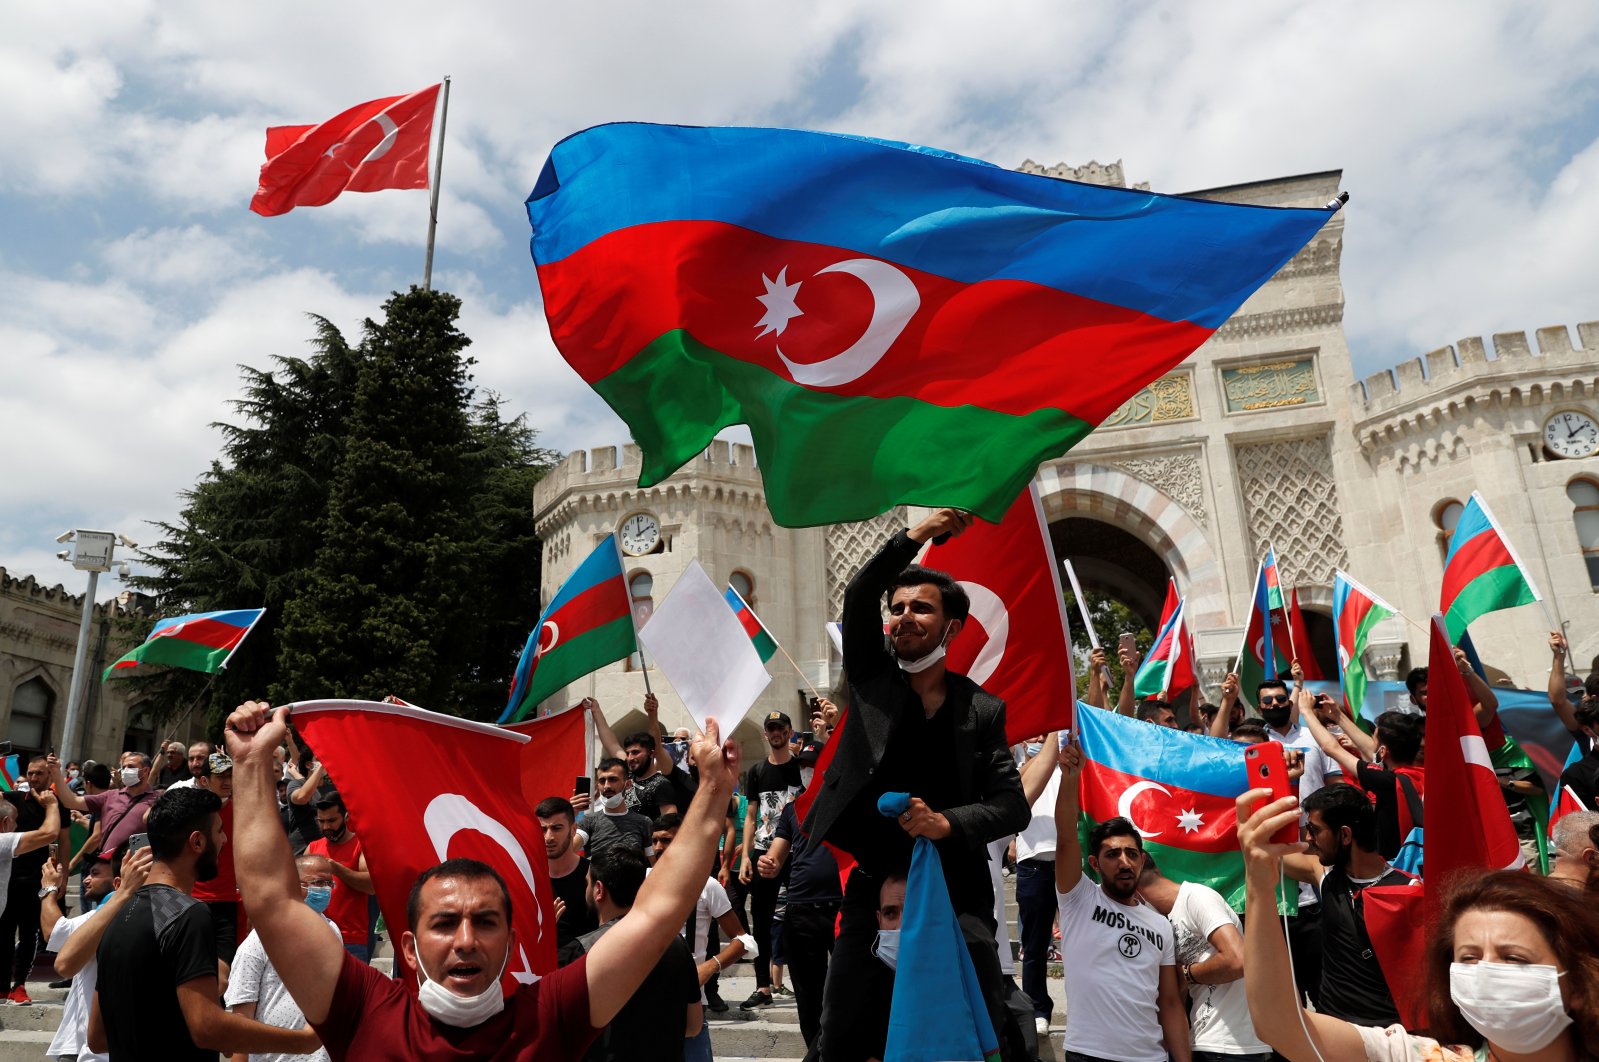 Azerbaijani men living in Turkey wave flags of Turkey and Azerbaijan during a protest following clashes between Azerbaijan and Armenia, in Istanbul, Turkey, July 19, 2020. (Reuters File Photo)